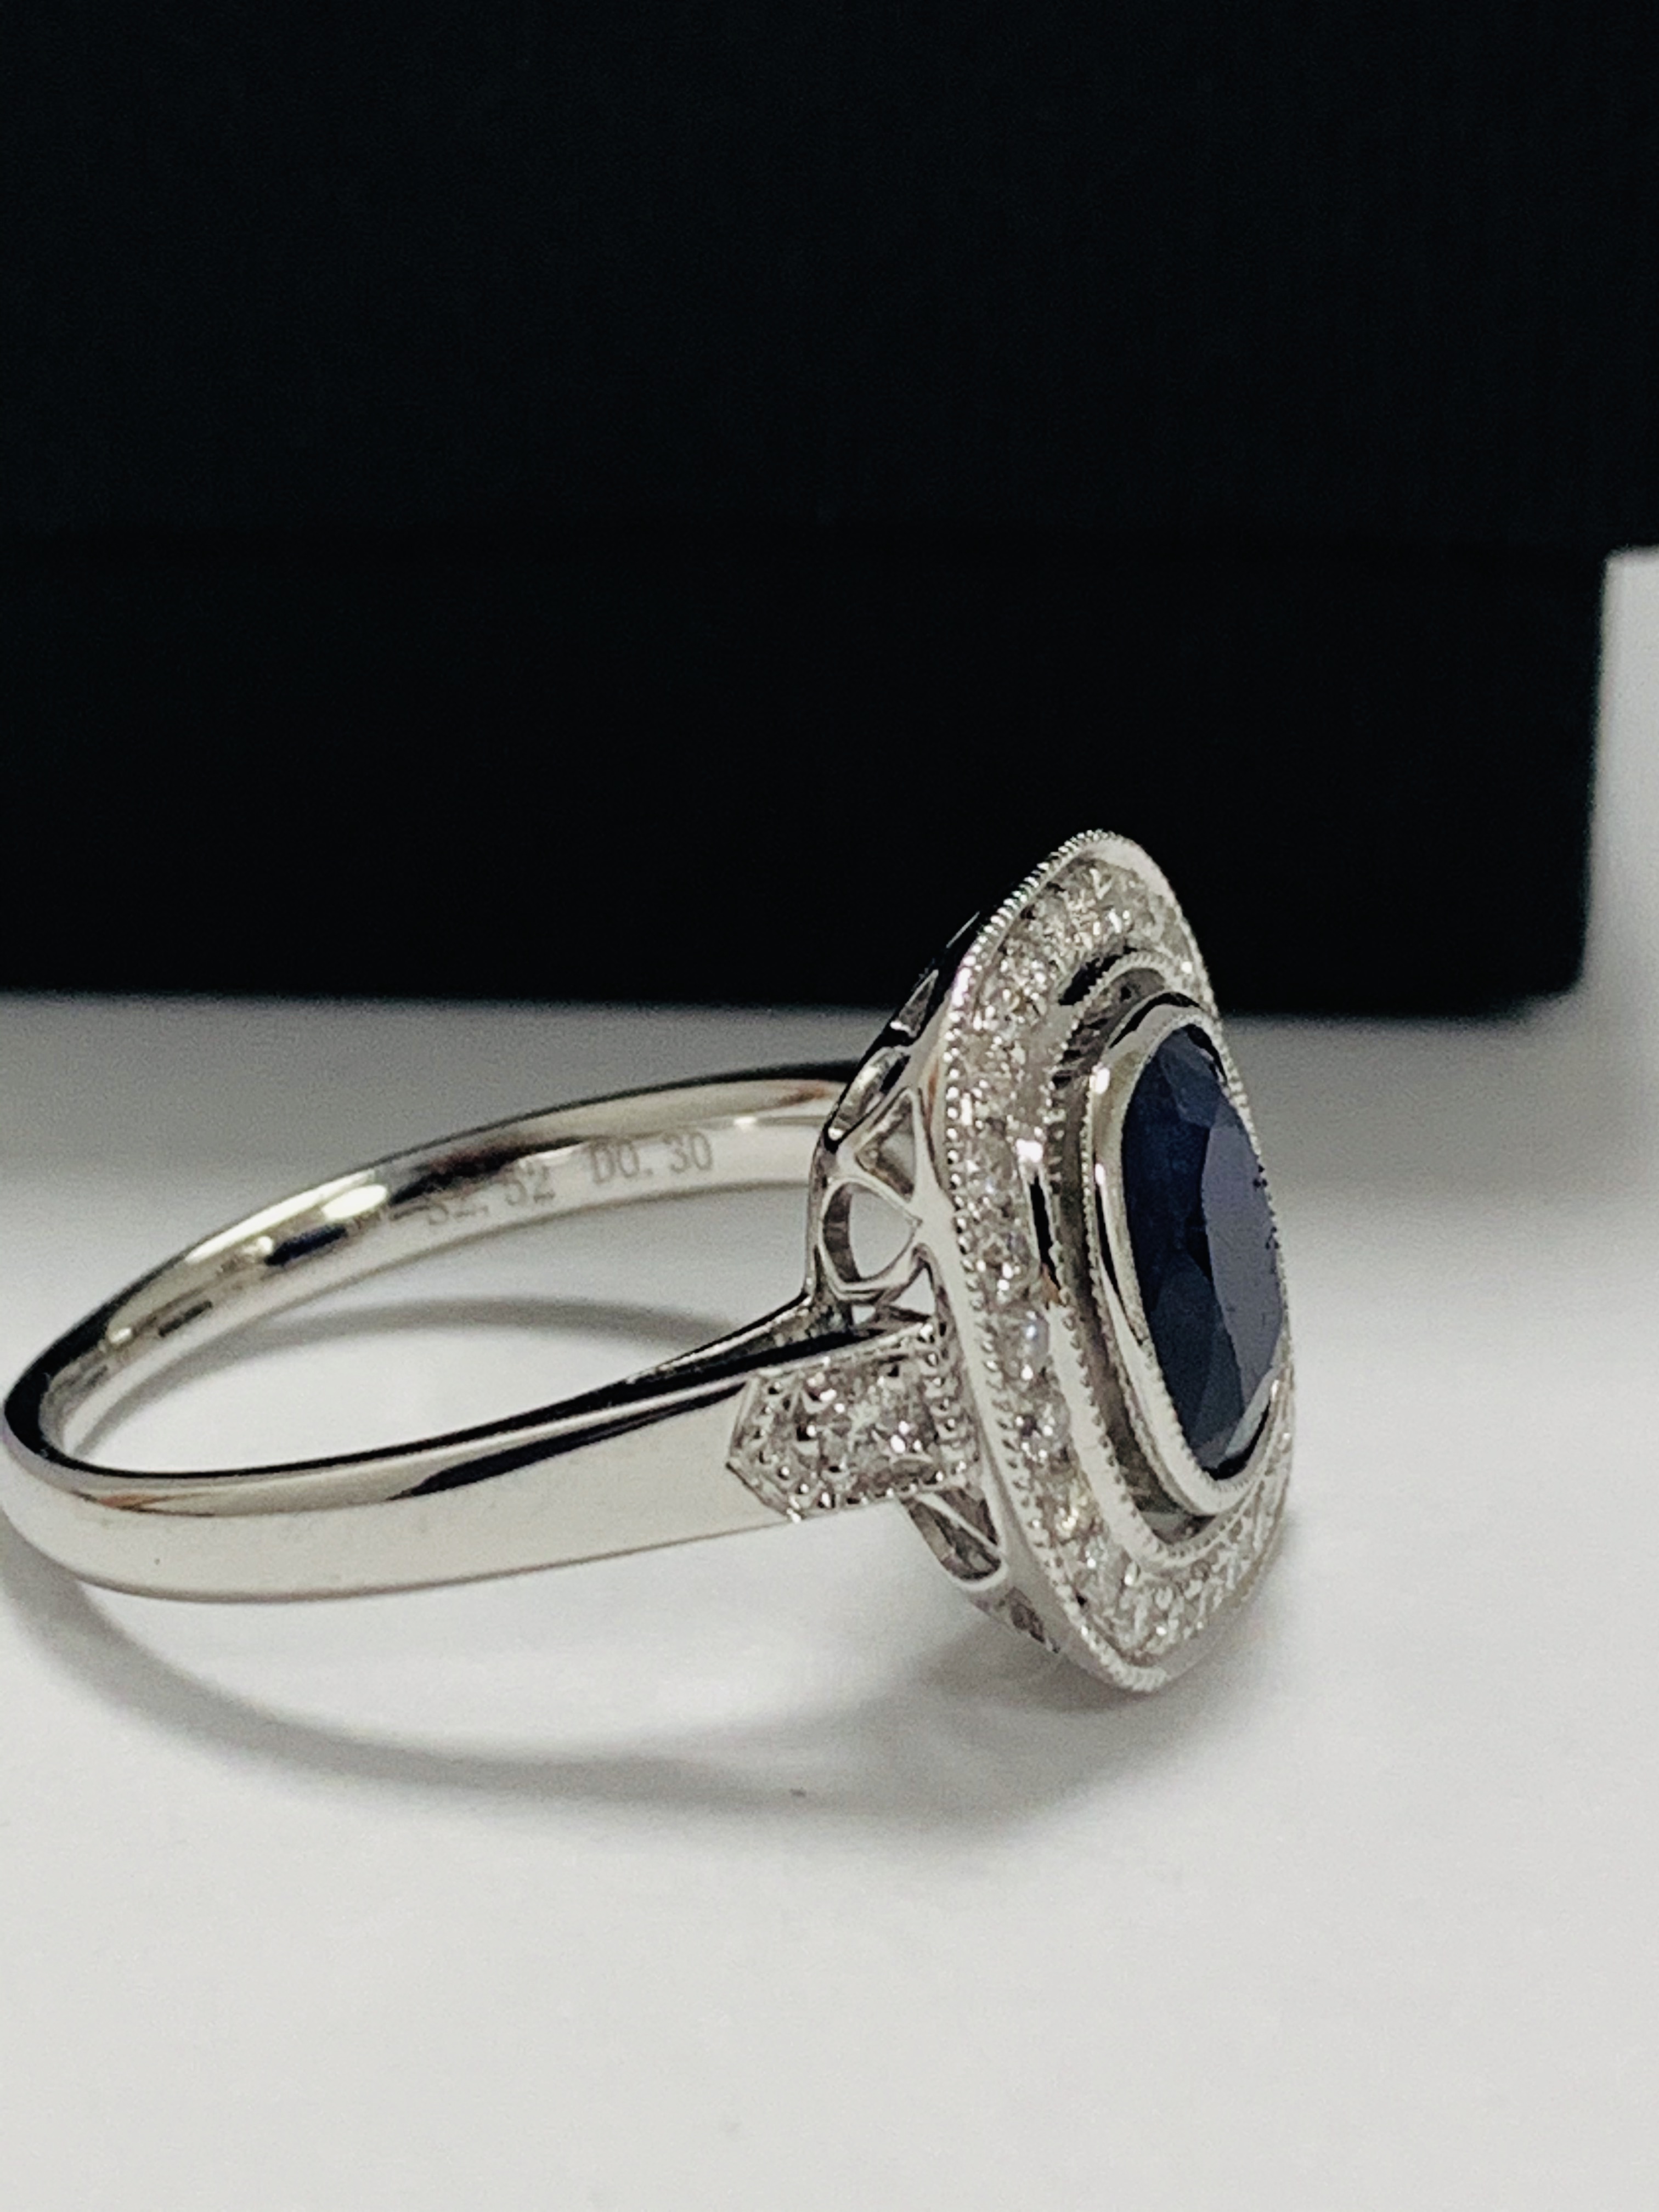 18ct White Gold Sapphire and Diamond ring featuring centre, cushion cut, natural Kashmir Sapphire (2 - Image 8 of 12